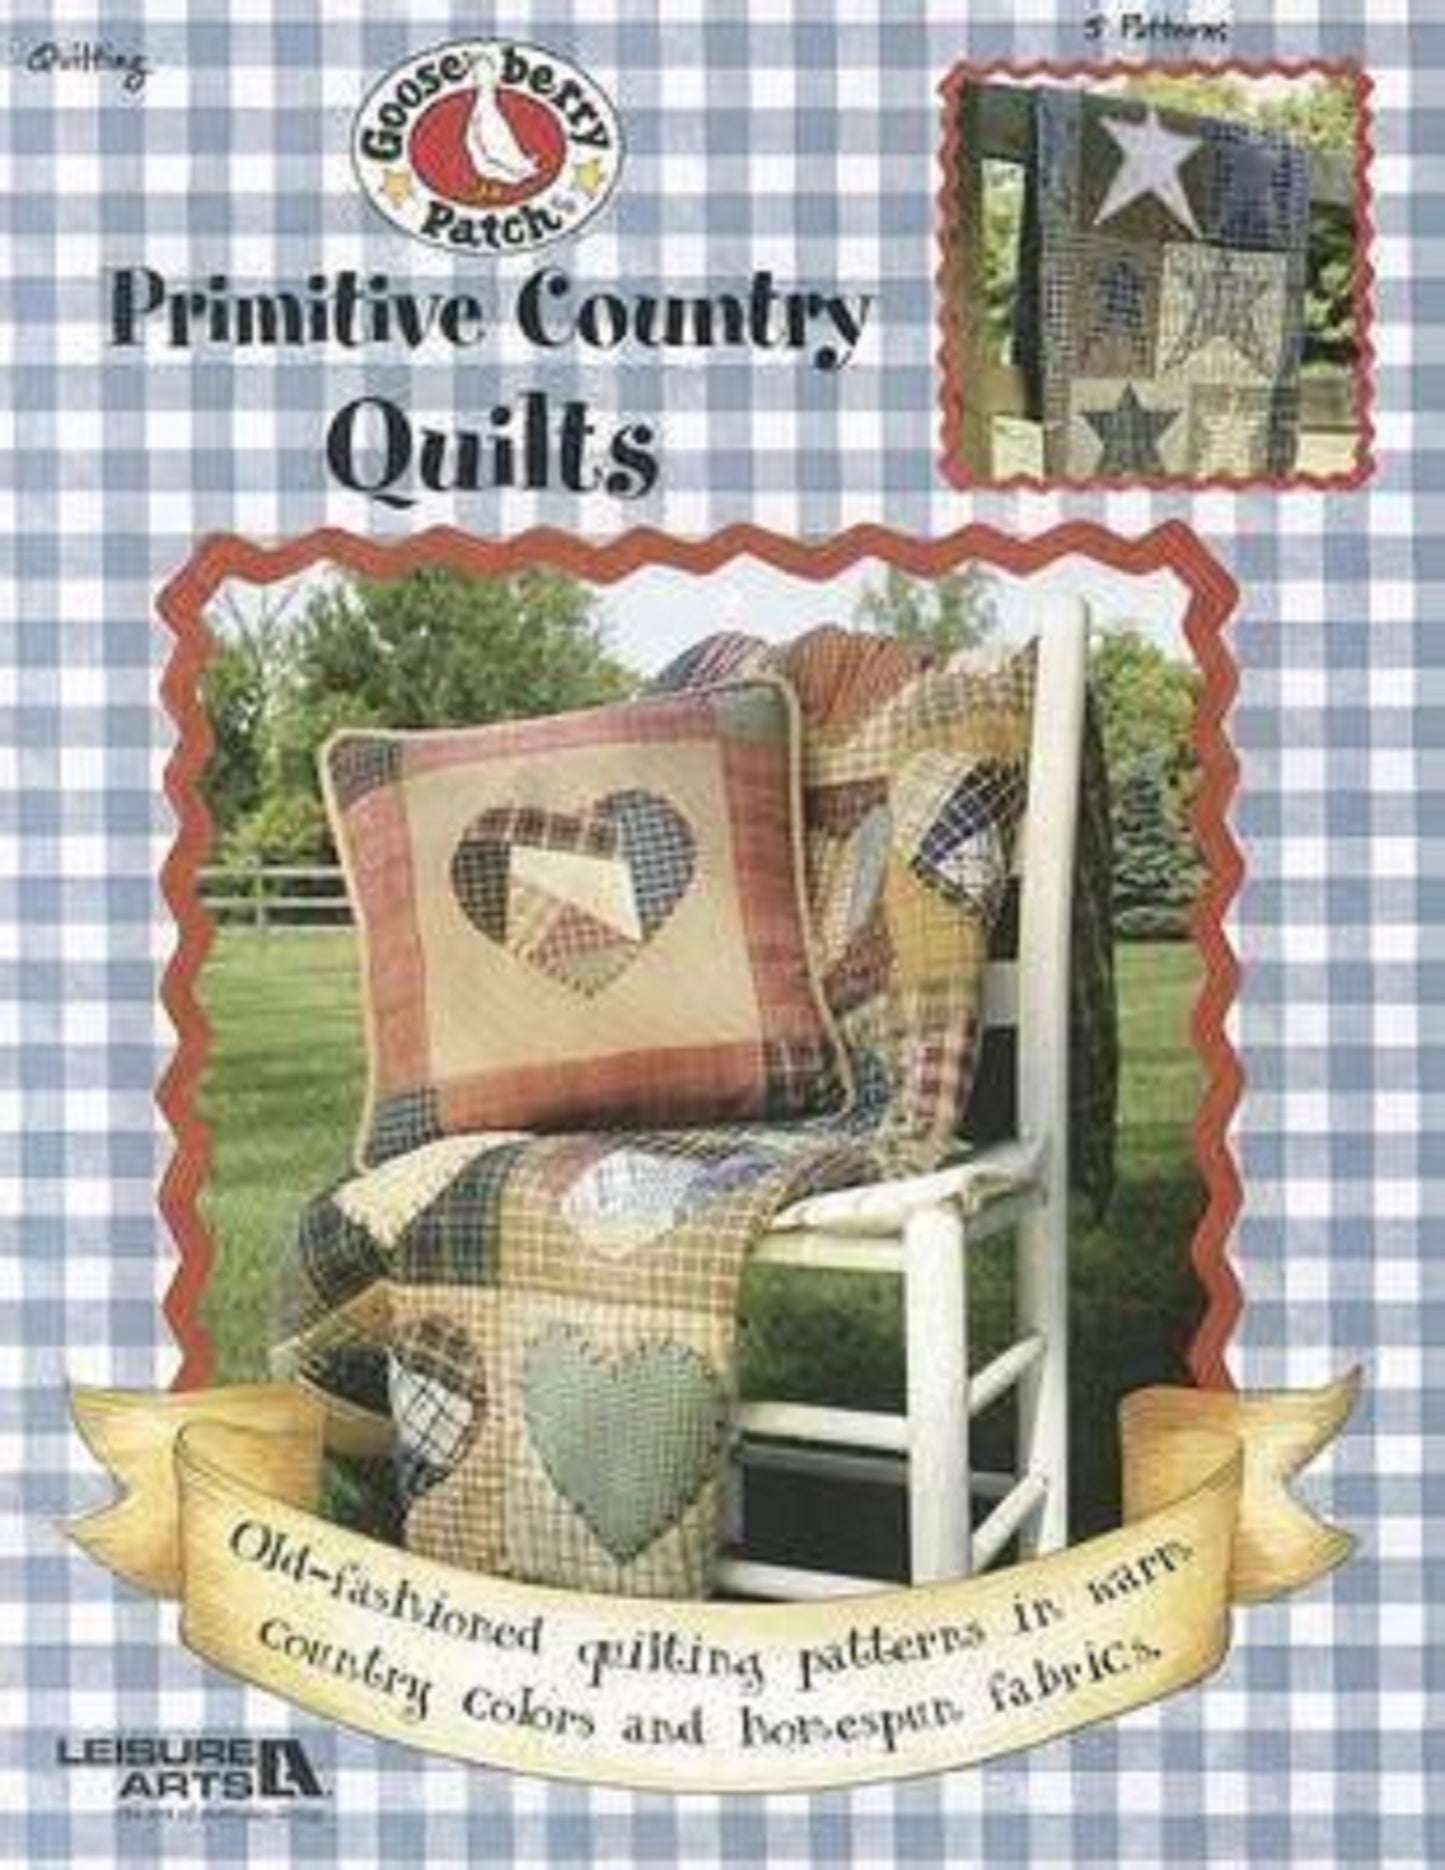 Gooseberry Patch Primitive Country Quilts-5 Patterns